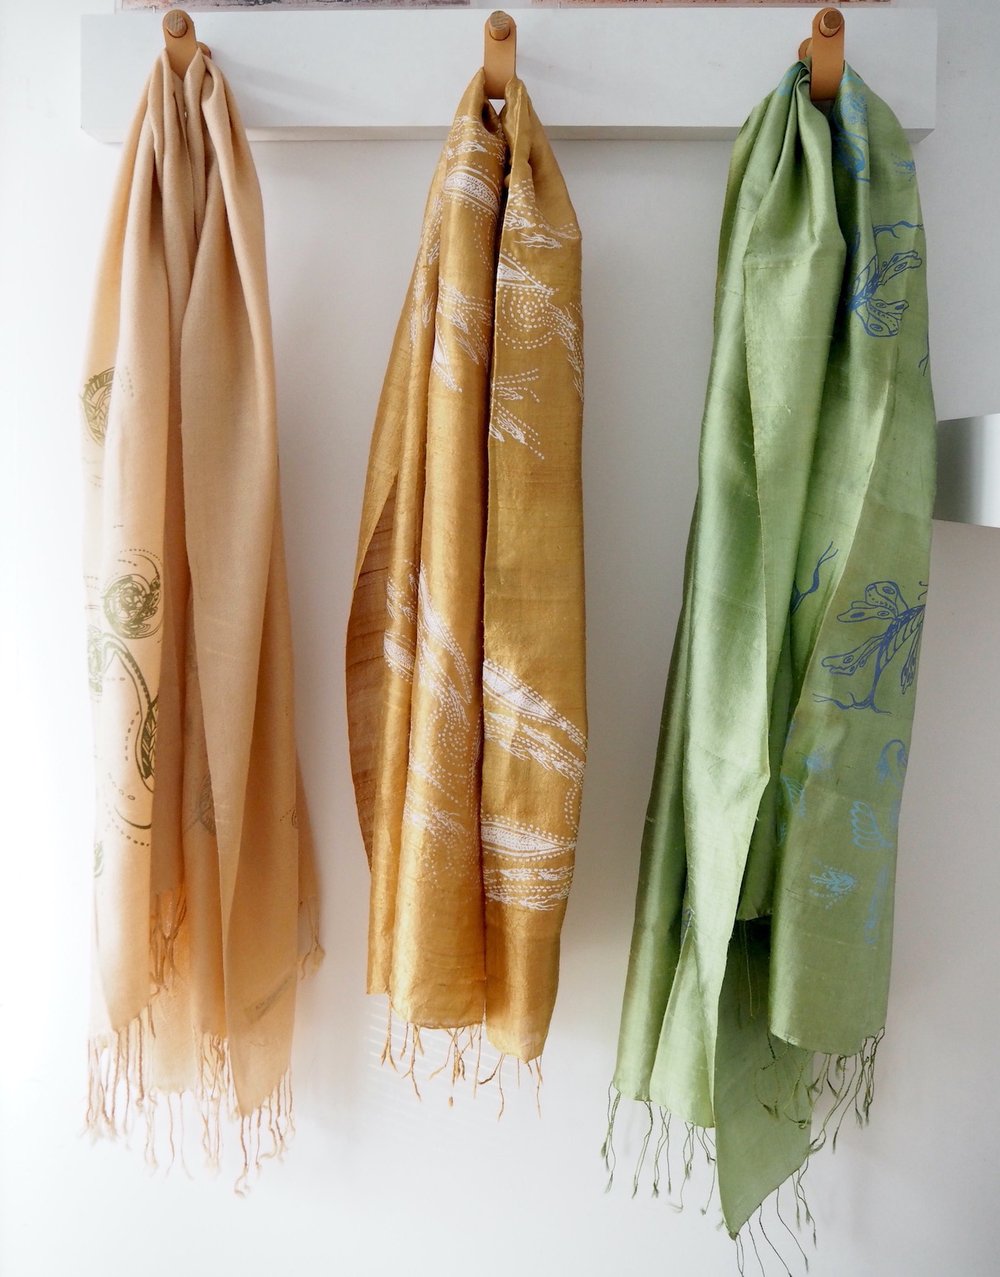 GOST Jennifer Kemarre Martiniello trio of scarves in afternoon sun 2 low res.jpg